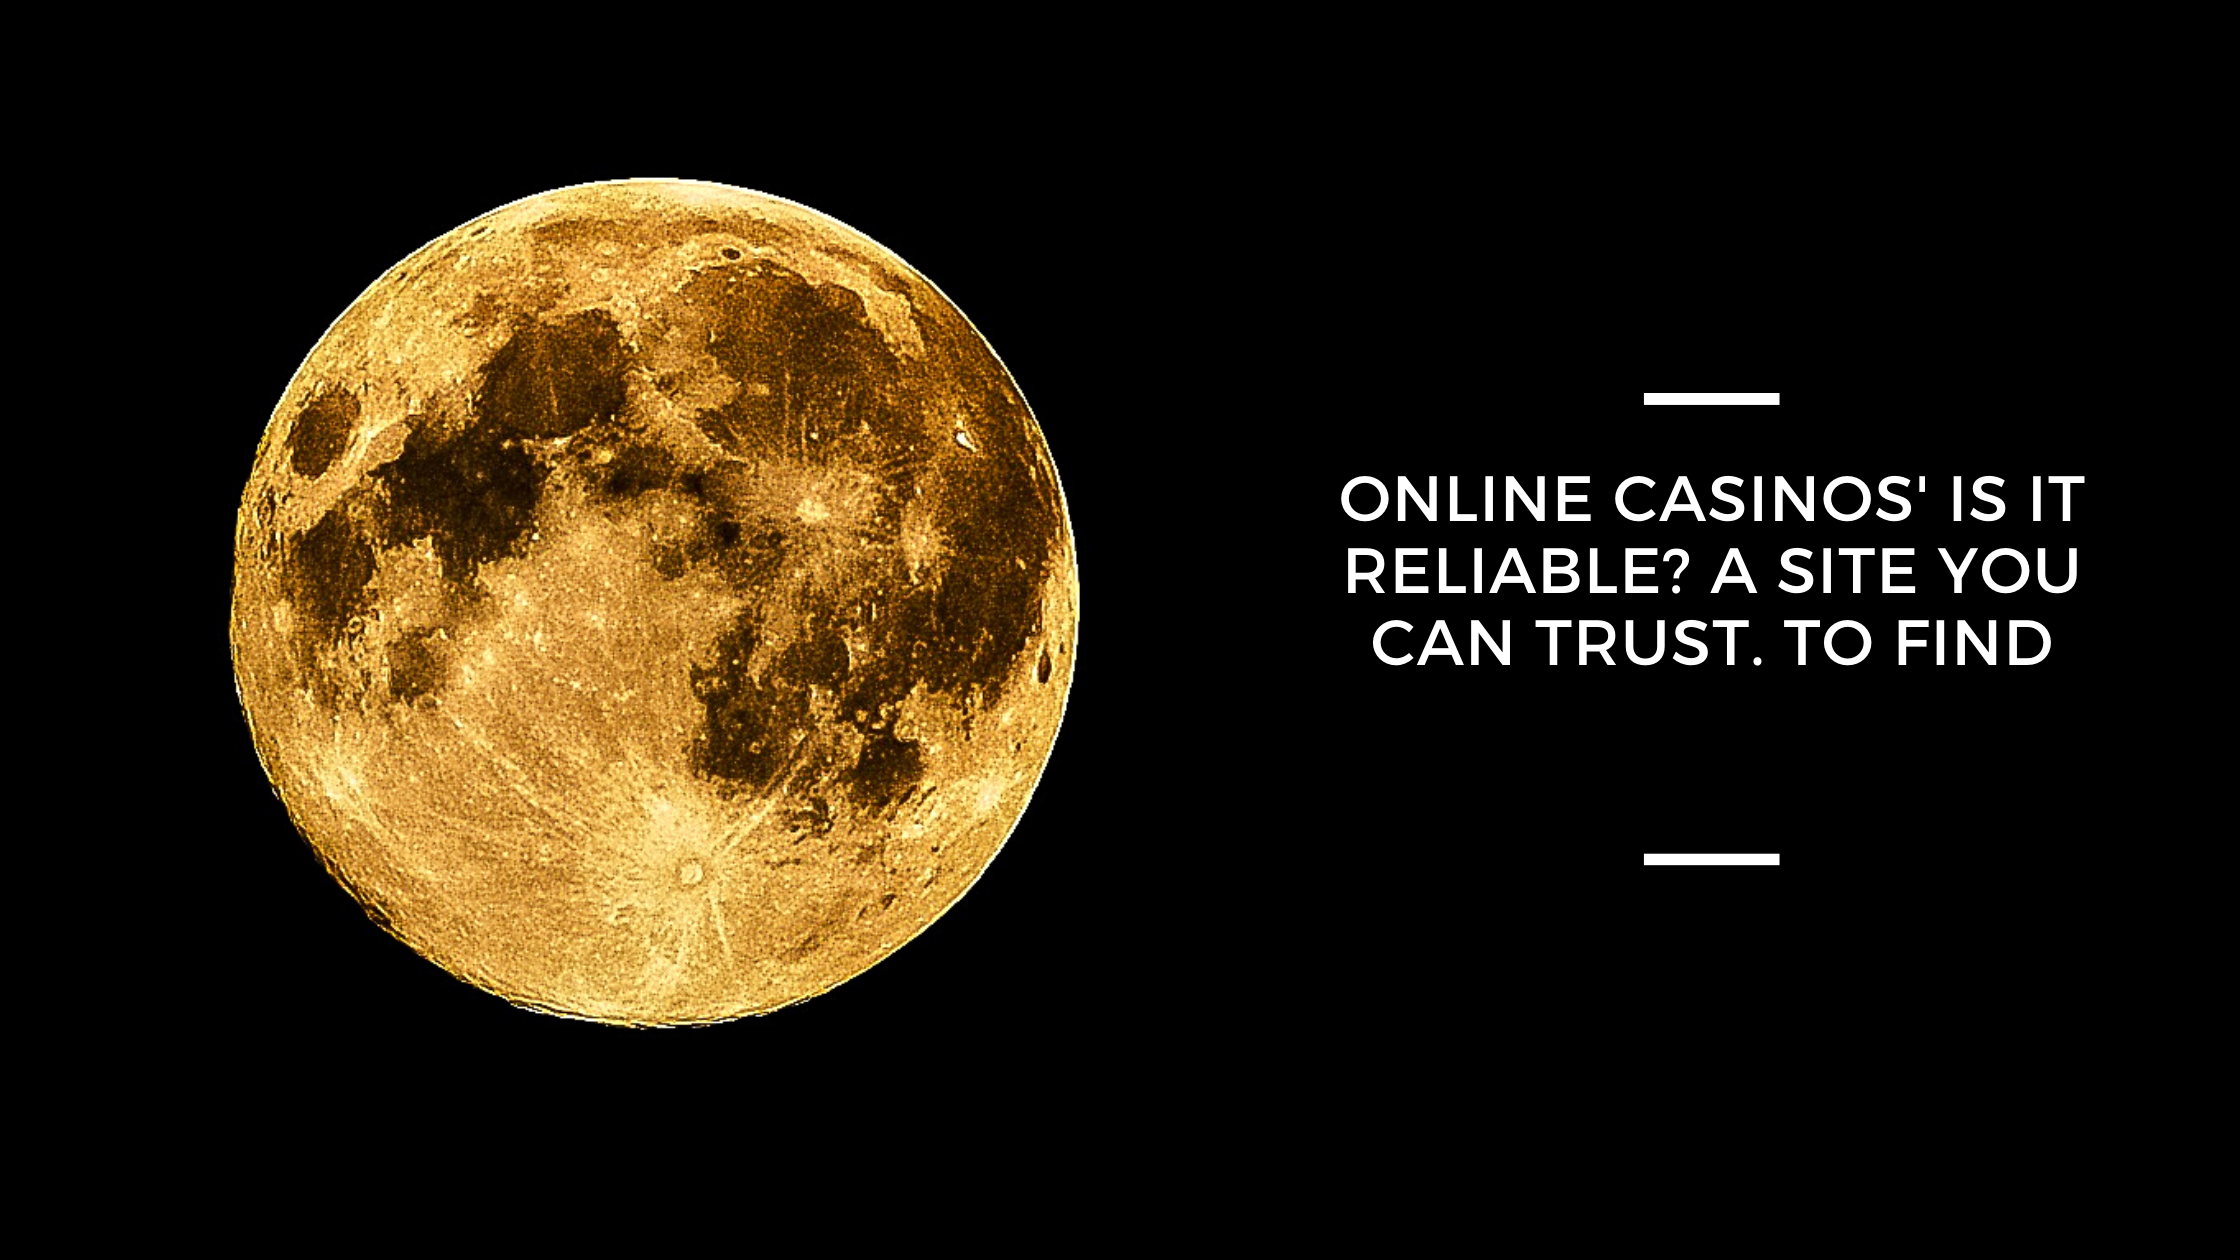 Online Casinos' Is it reliable? A site you can trust. To find